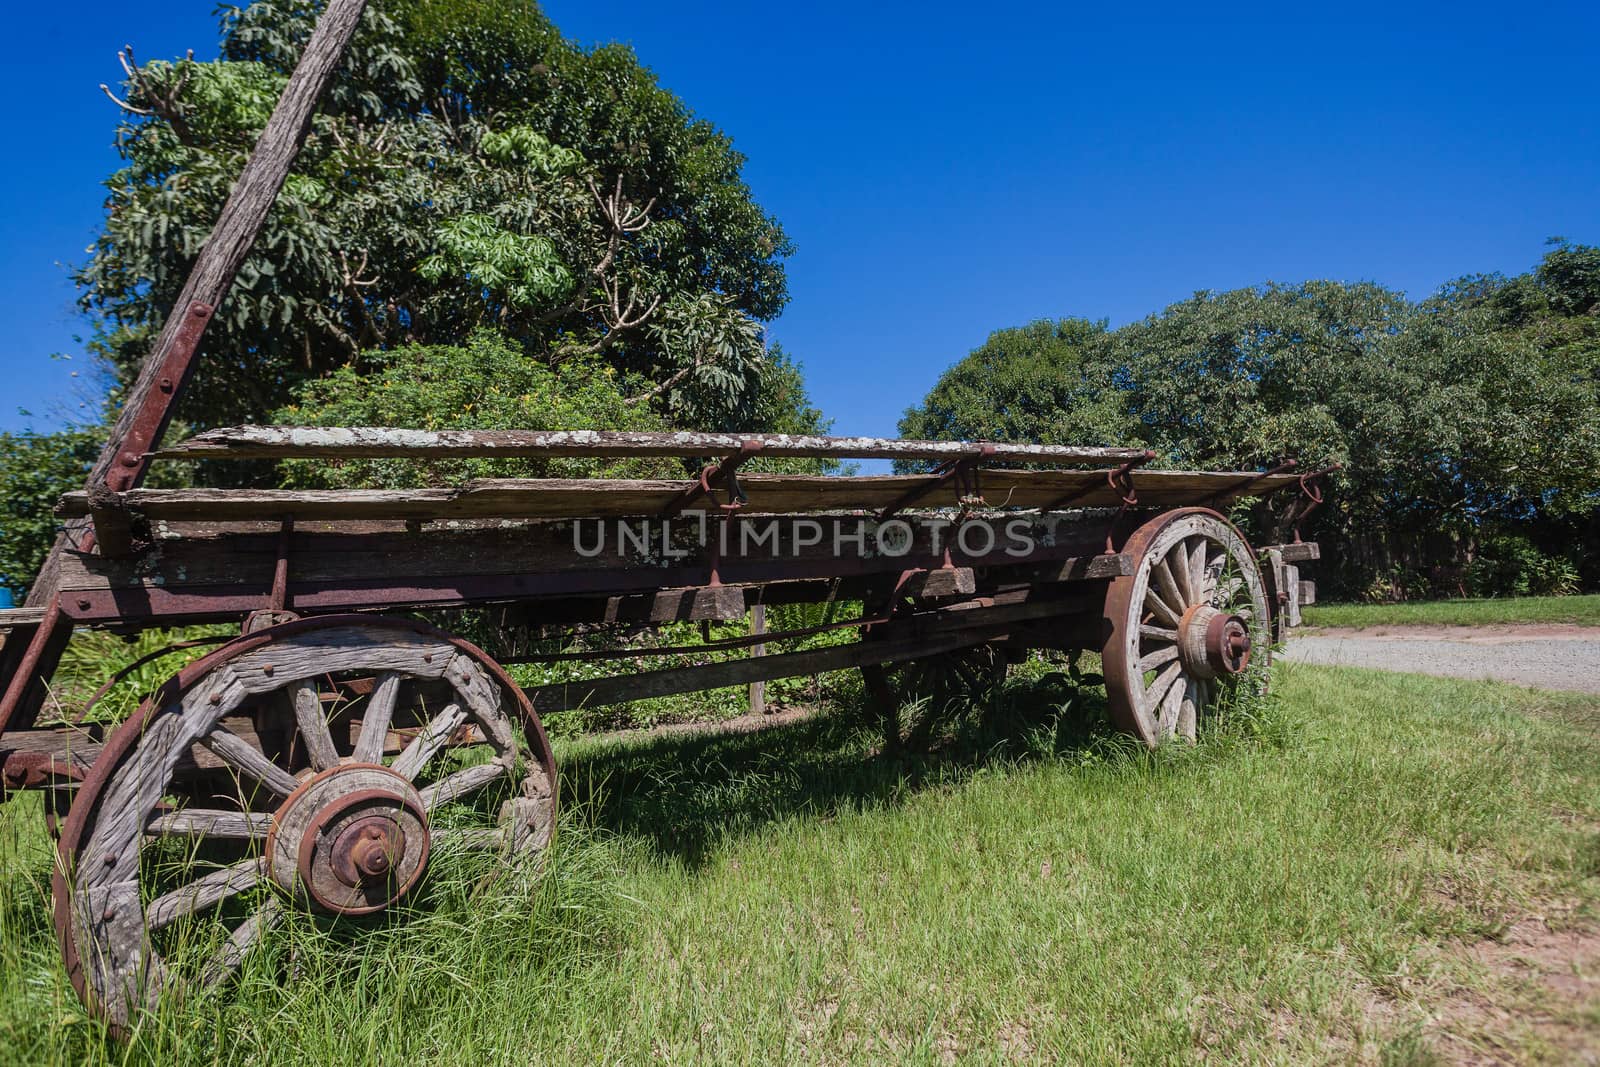 Old wood ox-wagon used by 1800 settlers traveling through South-Africa.